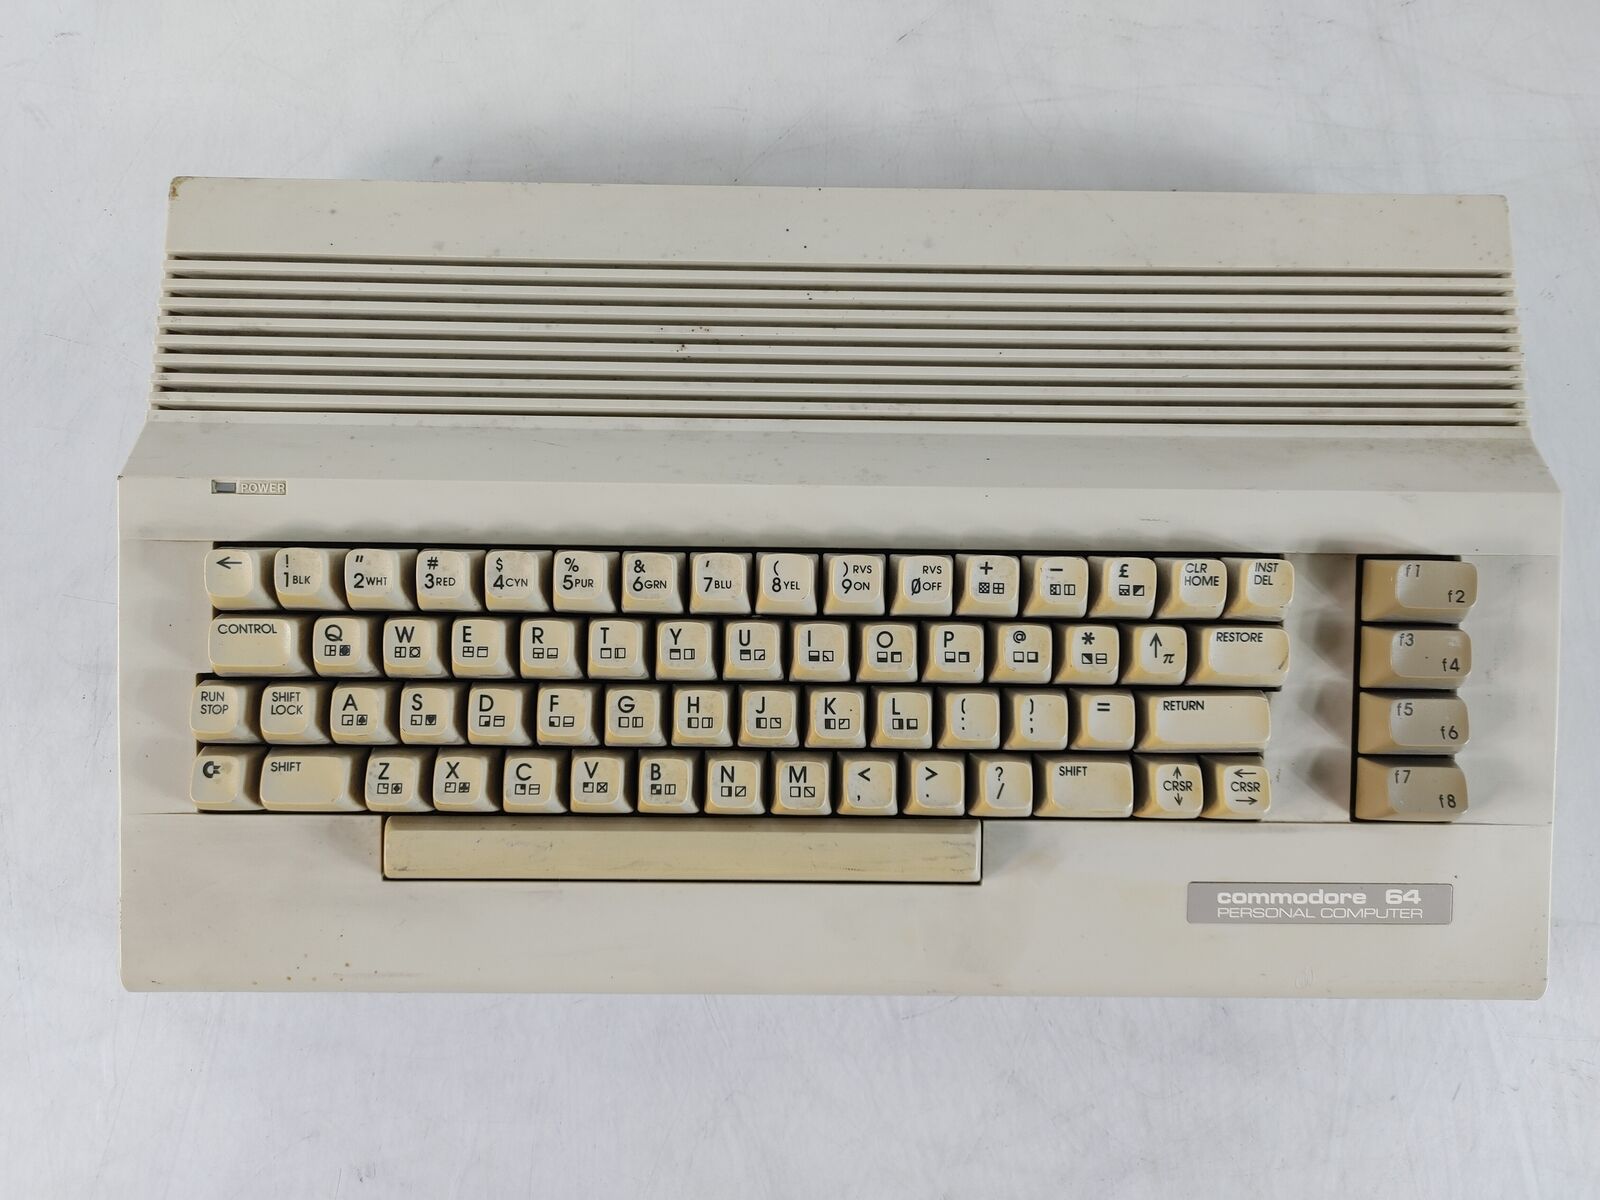 Vintage Commodore 64 Computer System Untested